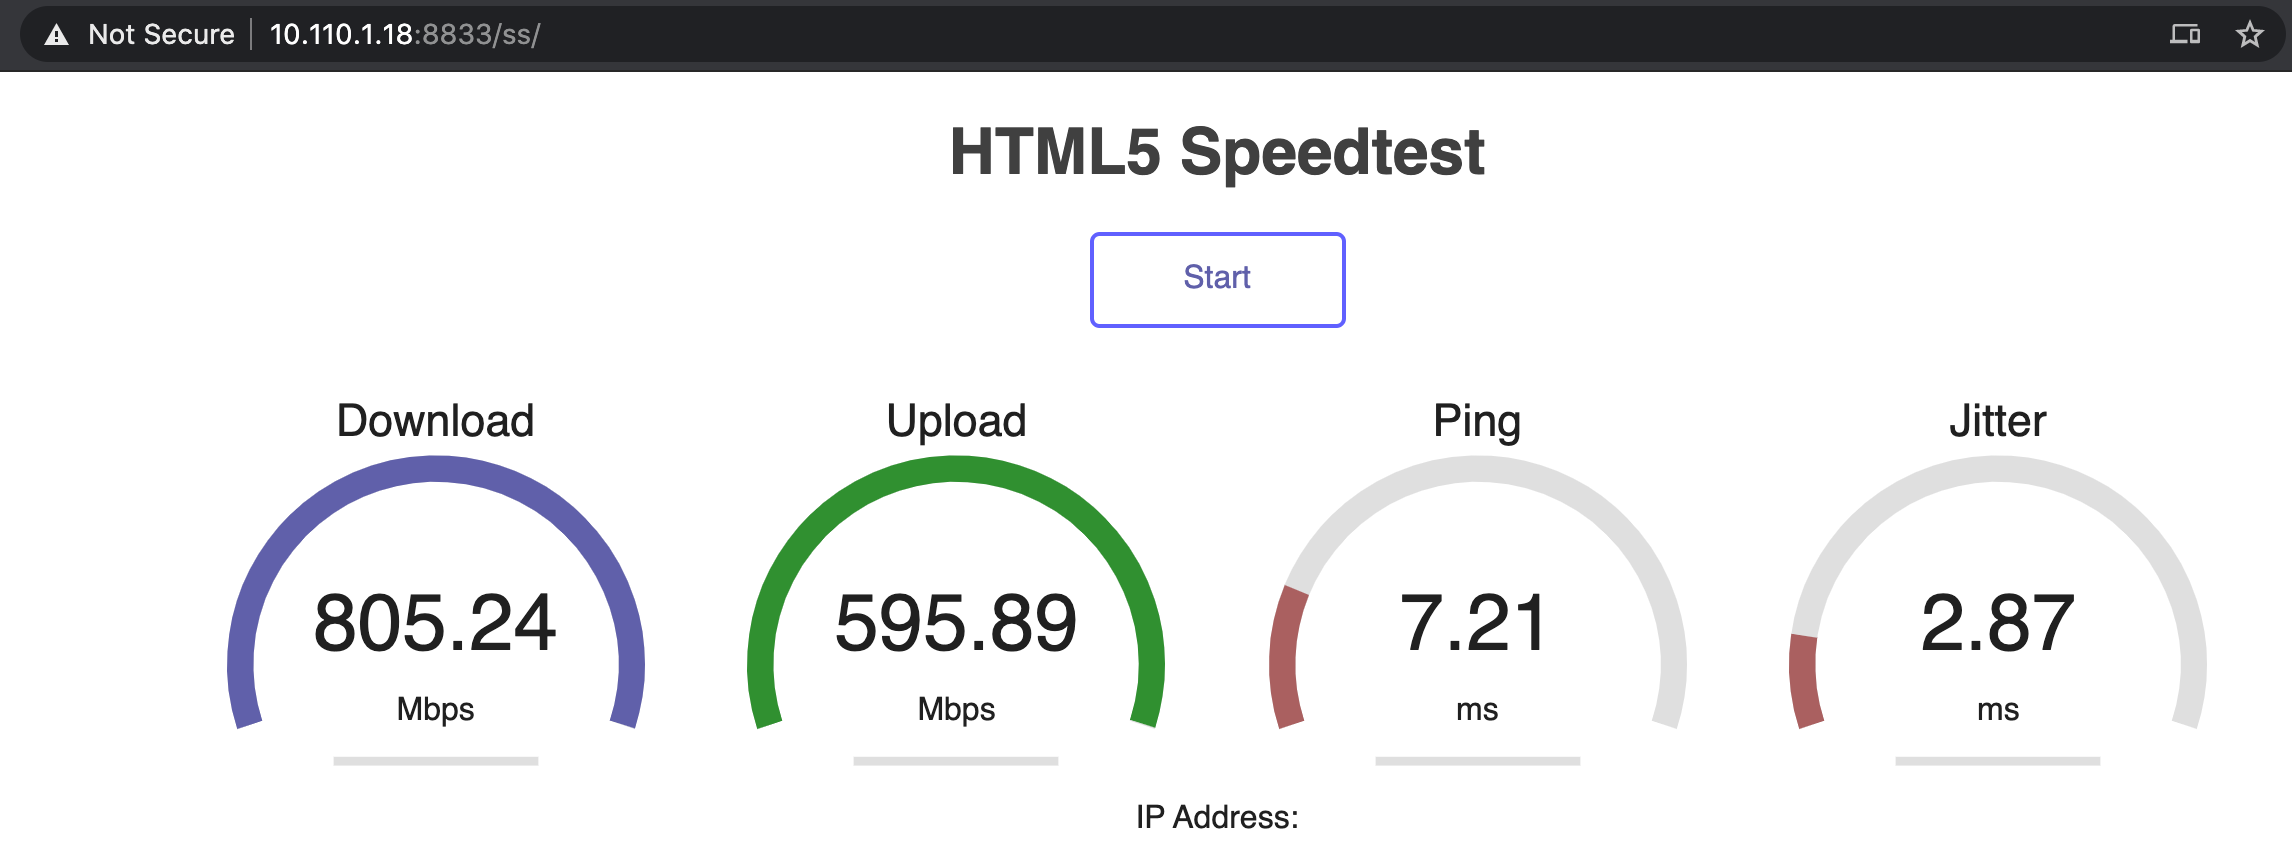 Speed tests can also run on devices not running the Firewalla app or devices connected with ethernet.